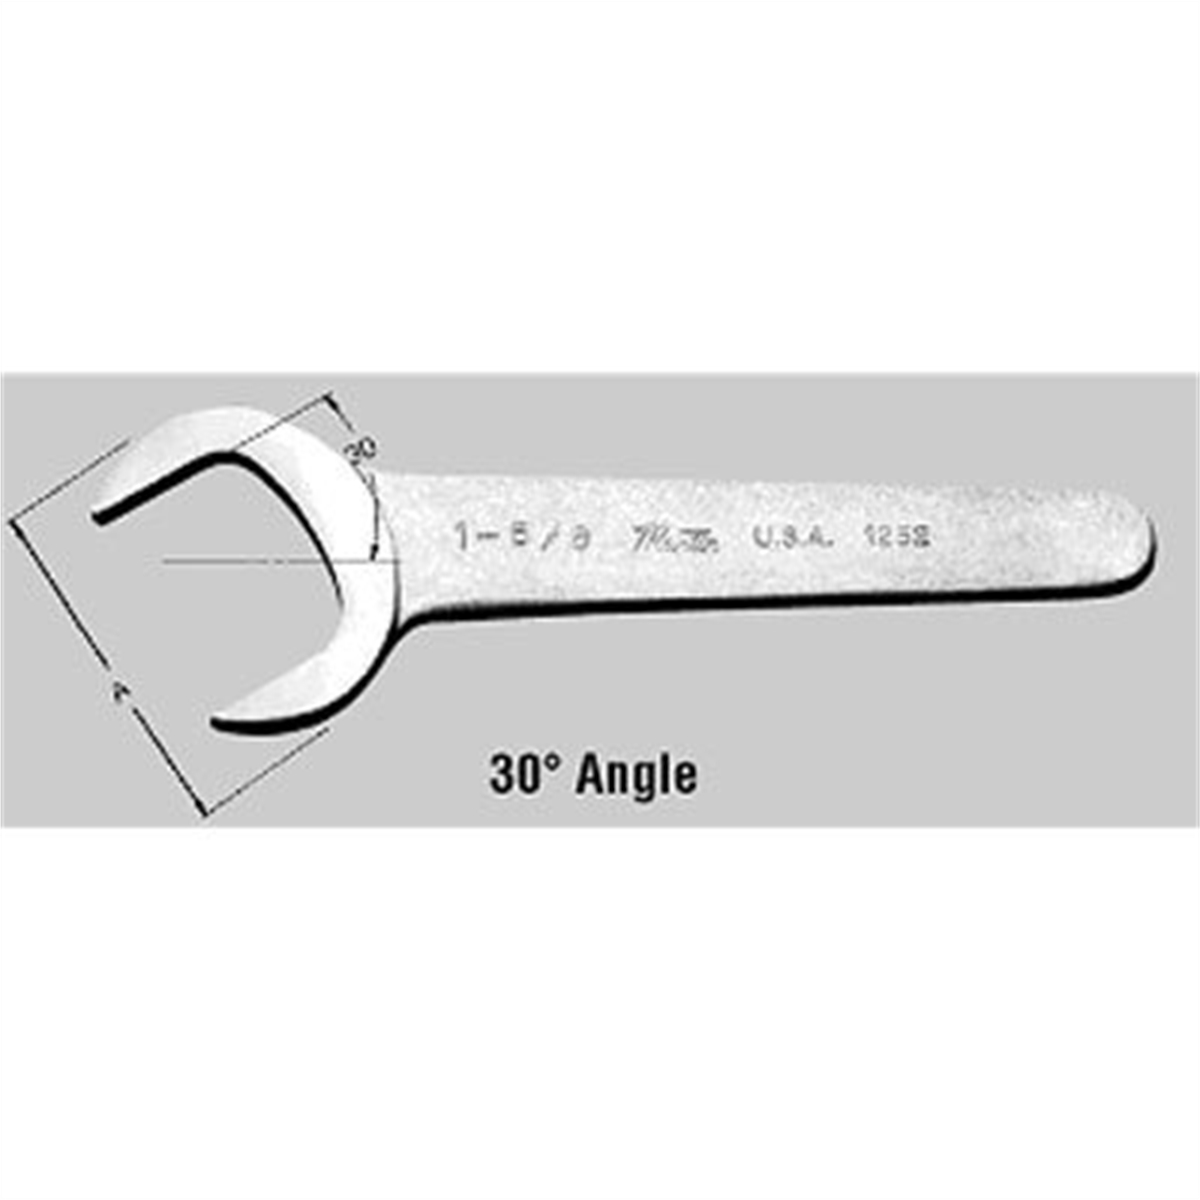 Chrome Service Wrench 30 Deg Angle - 1-15/16 In